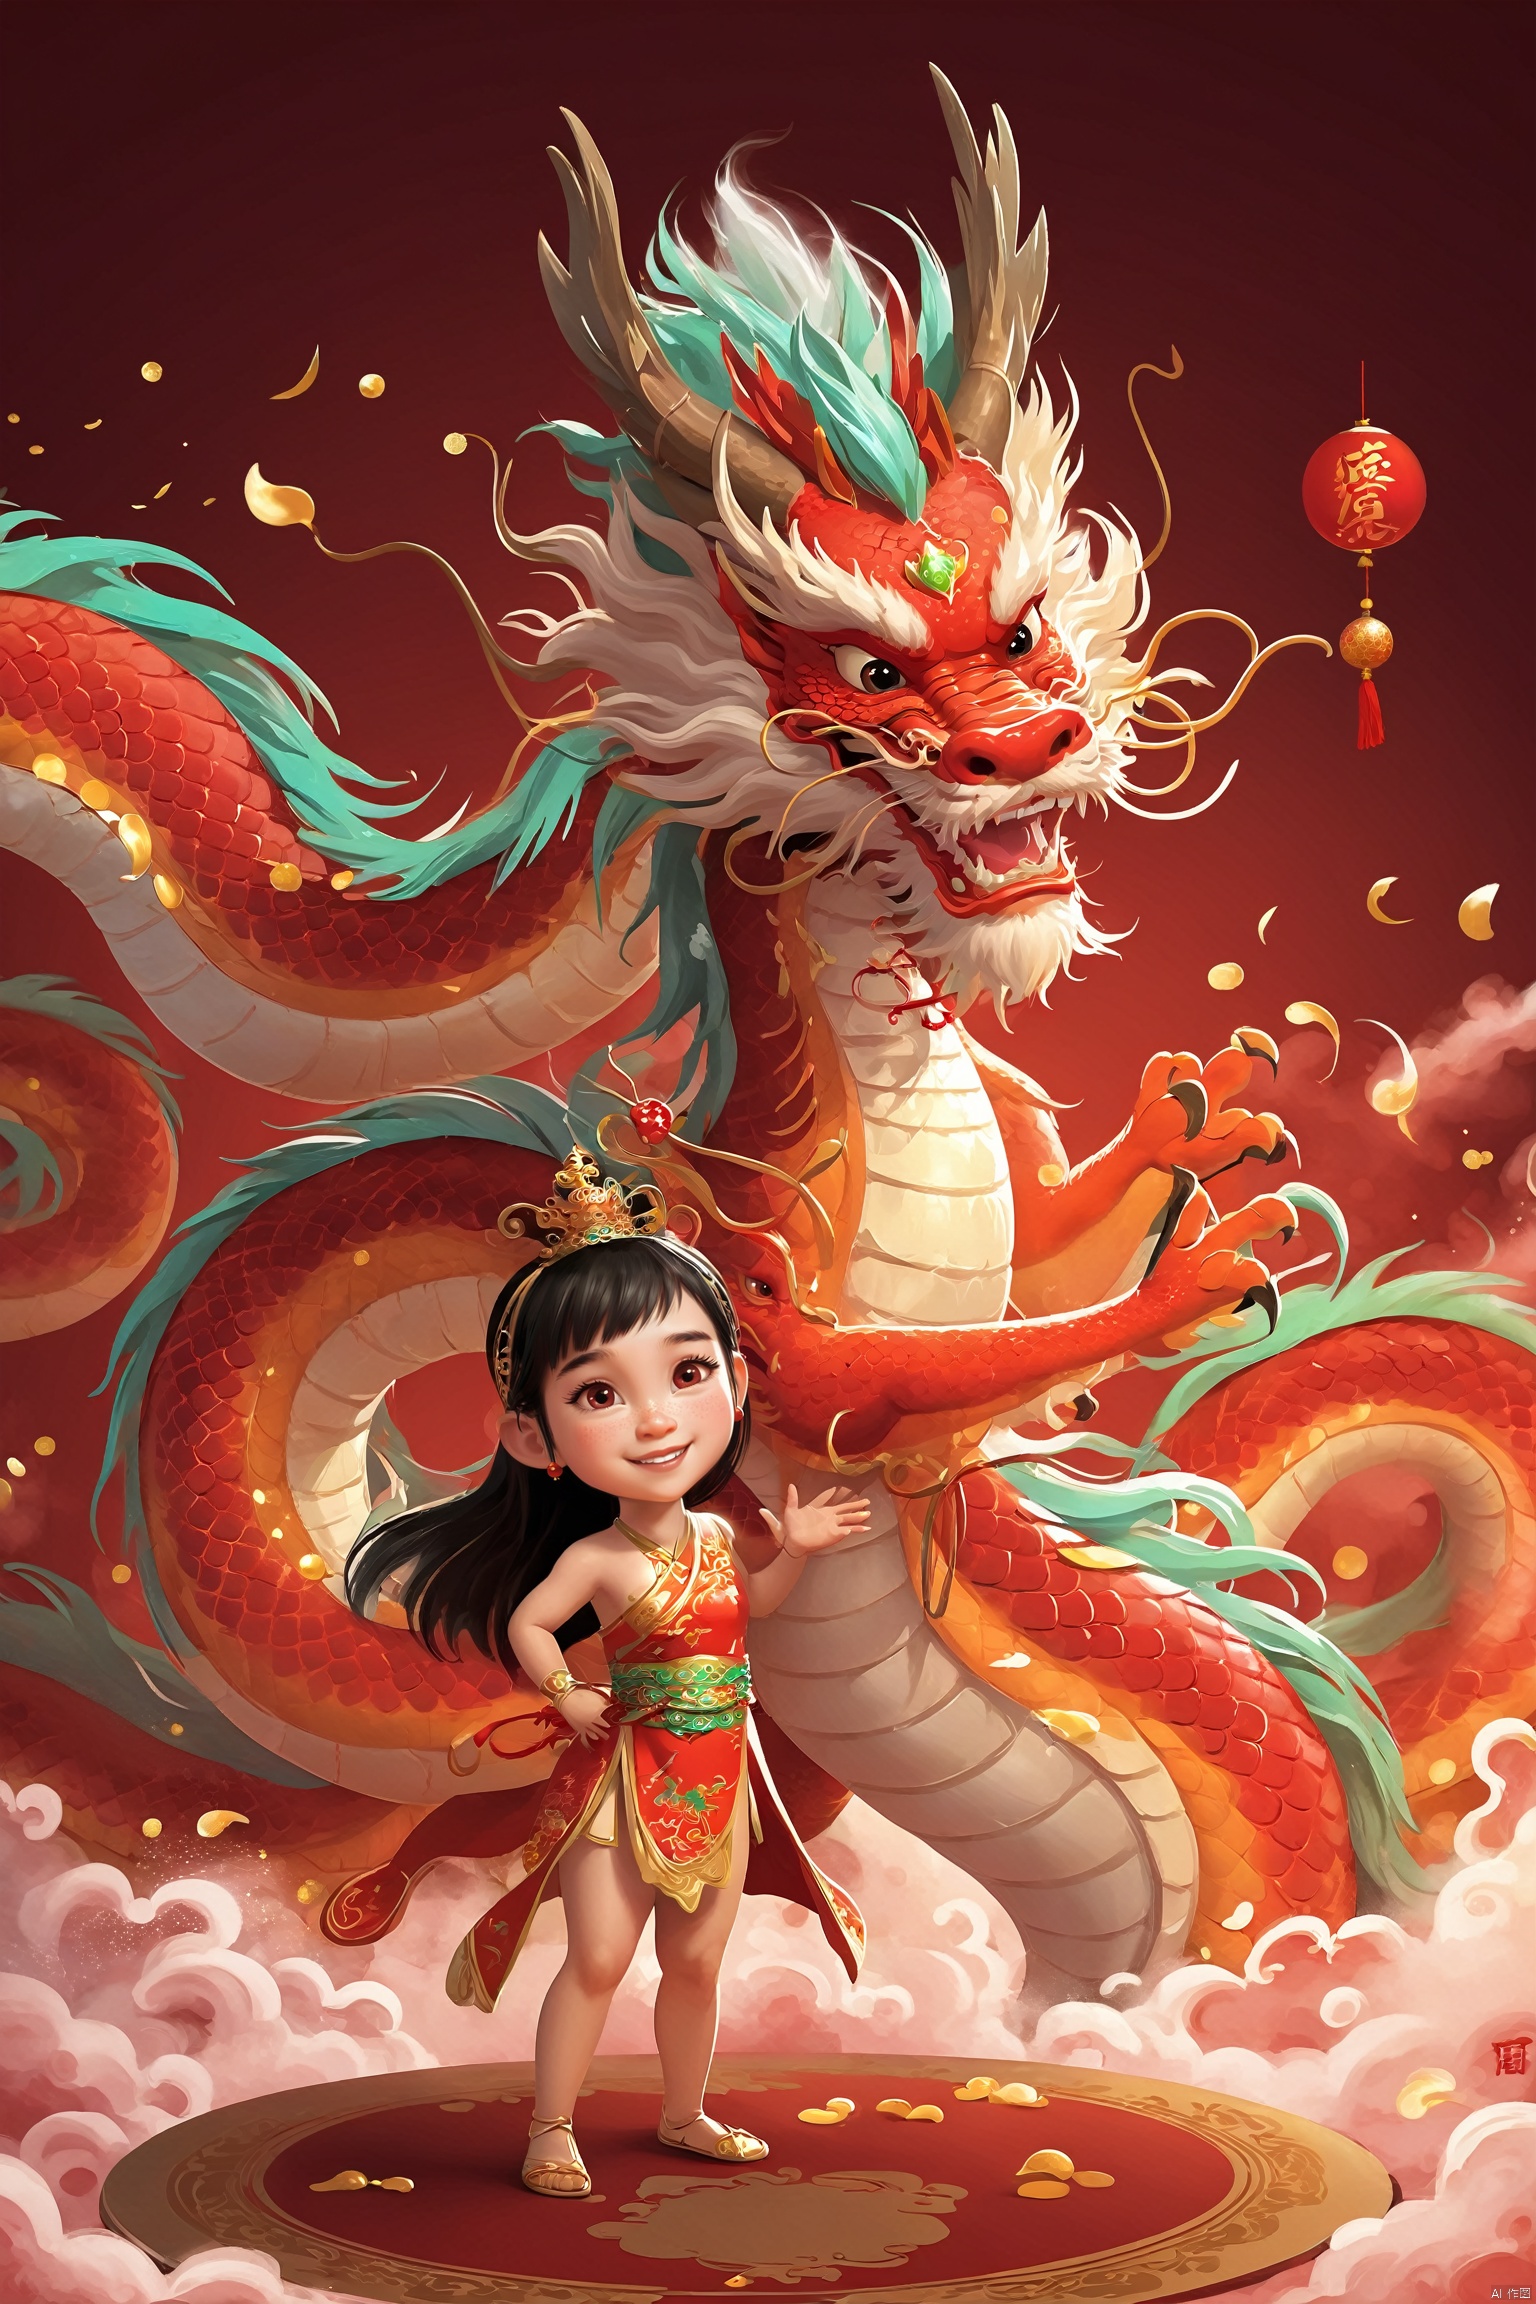  A cute and humanized red Chinese dragon and a Chinese little girl, in Pixar style, both nude, performing the same congratulatory gesture. The red background is very festive, with Chinese elements, welcoming the new year. 32k

